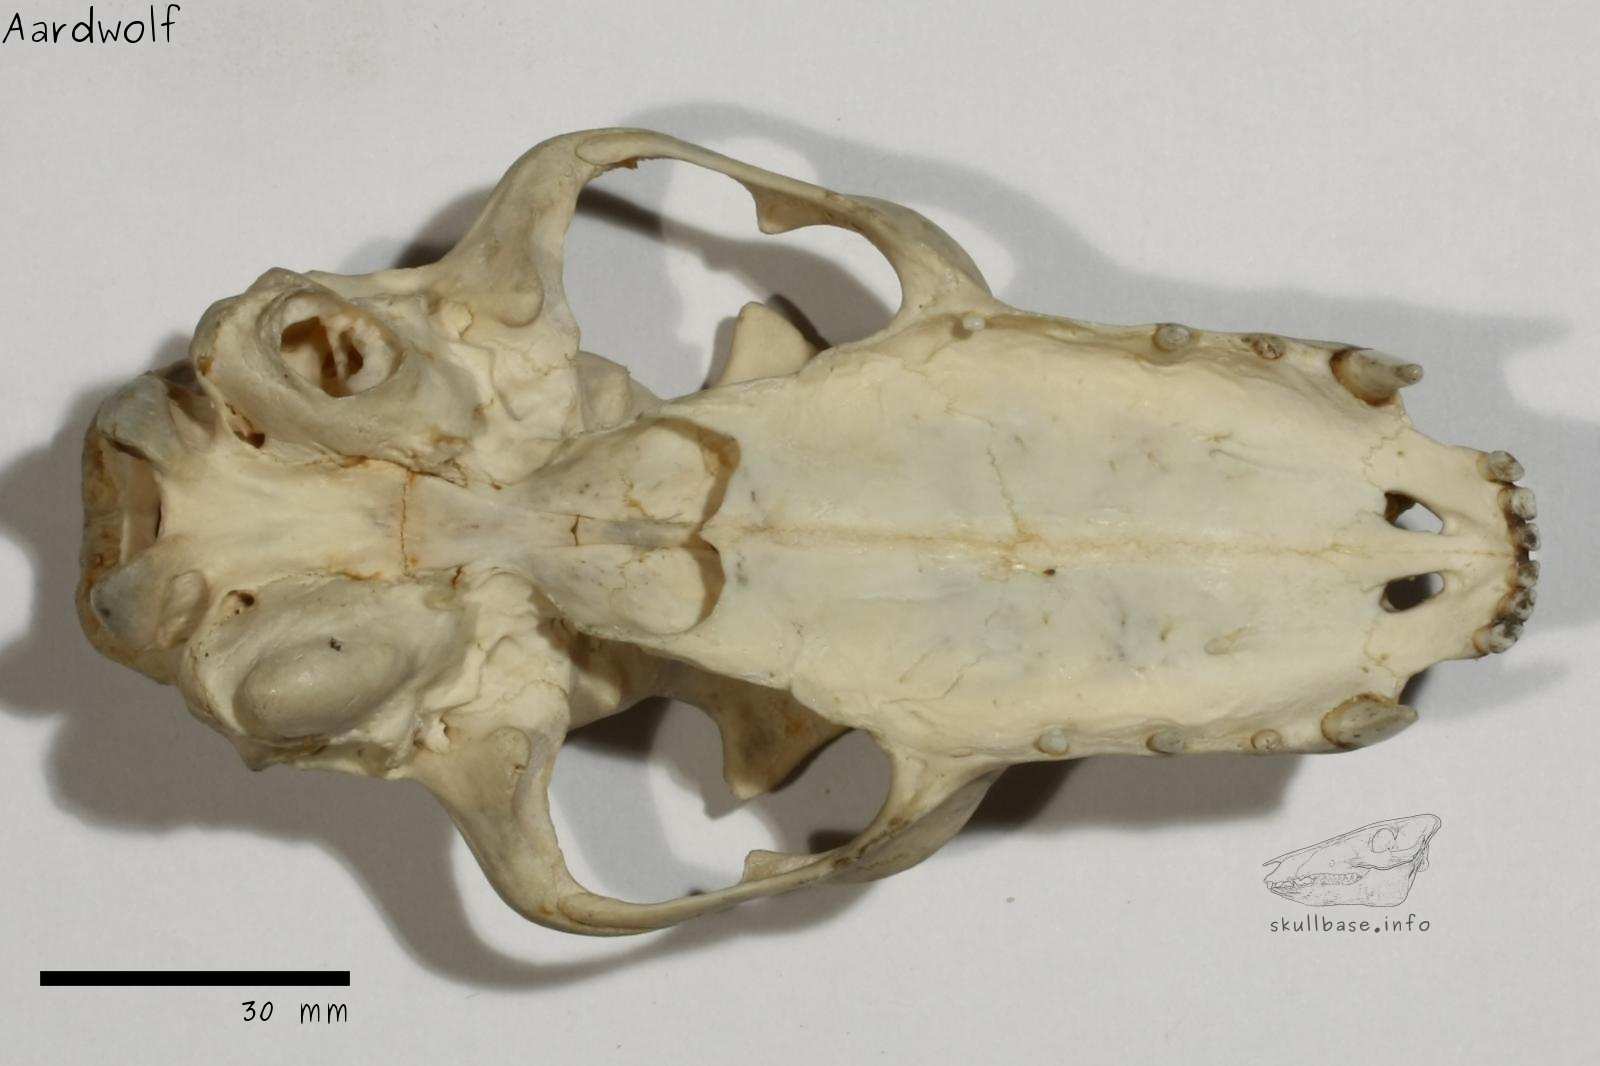 Aardwolf (Proteles cristata) skull ventral view